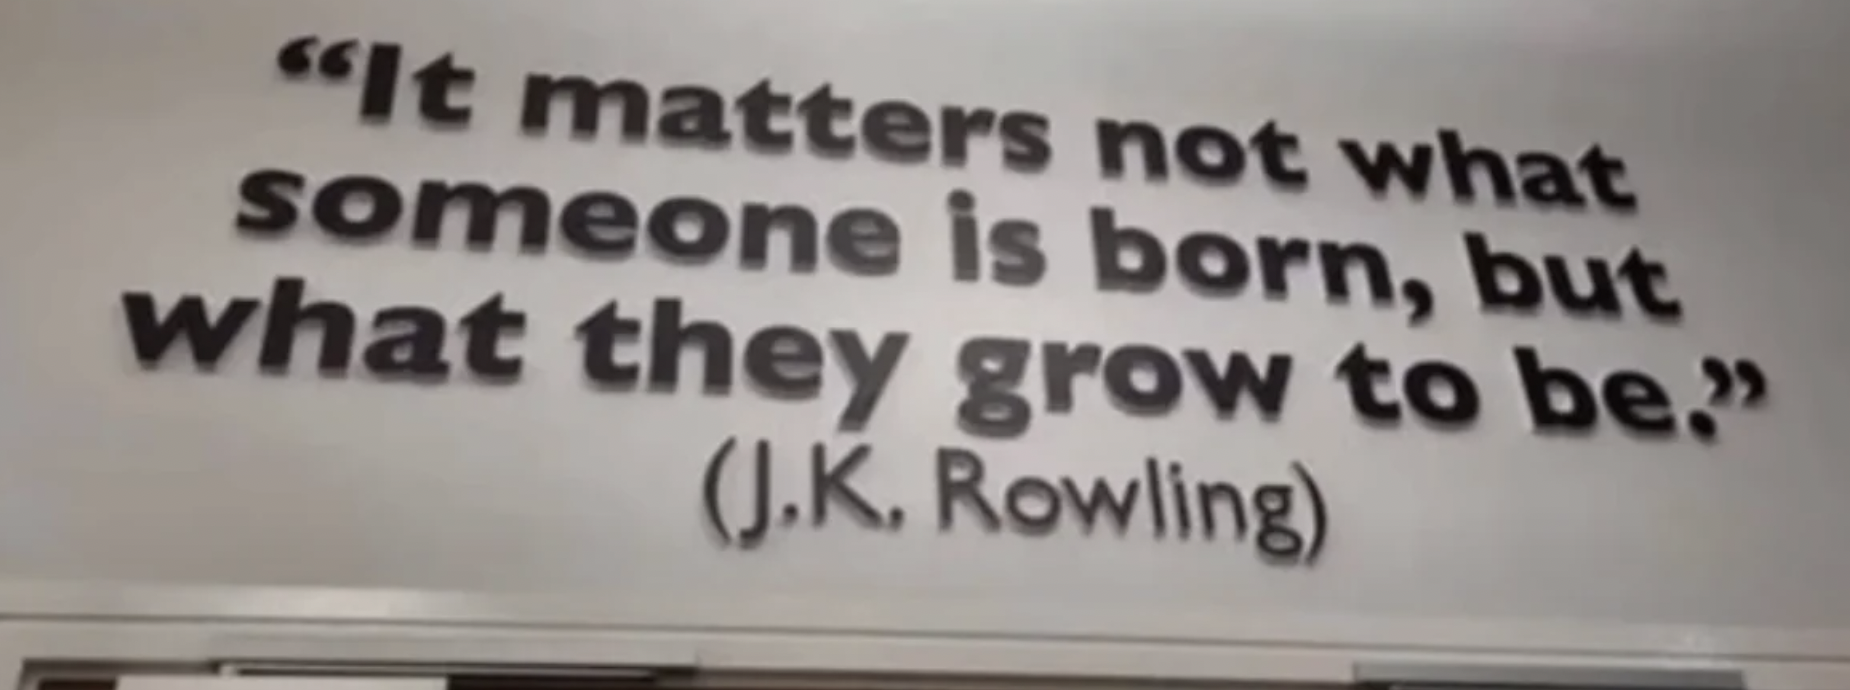 signage - "It matters not what someone is born, but what they grow to be." J.K. Rowling